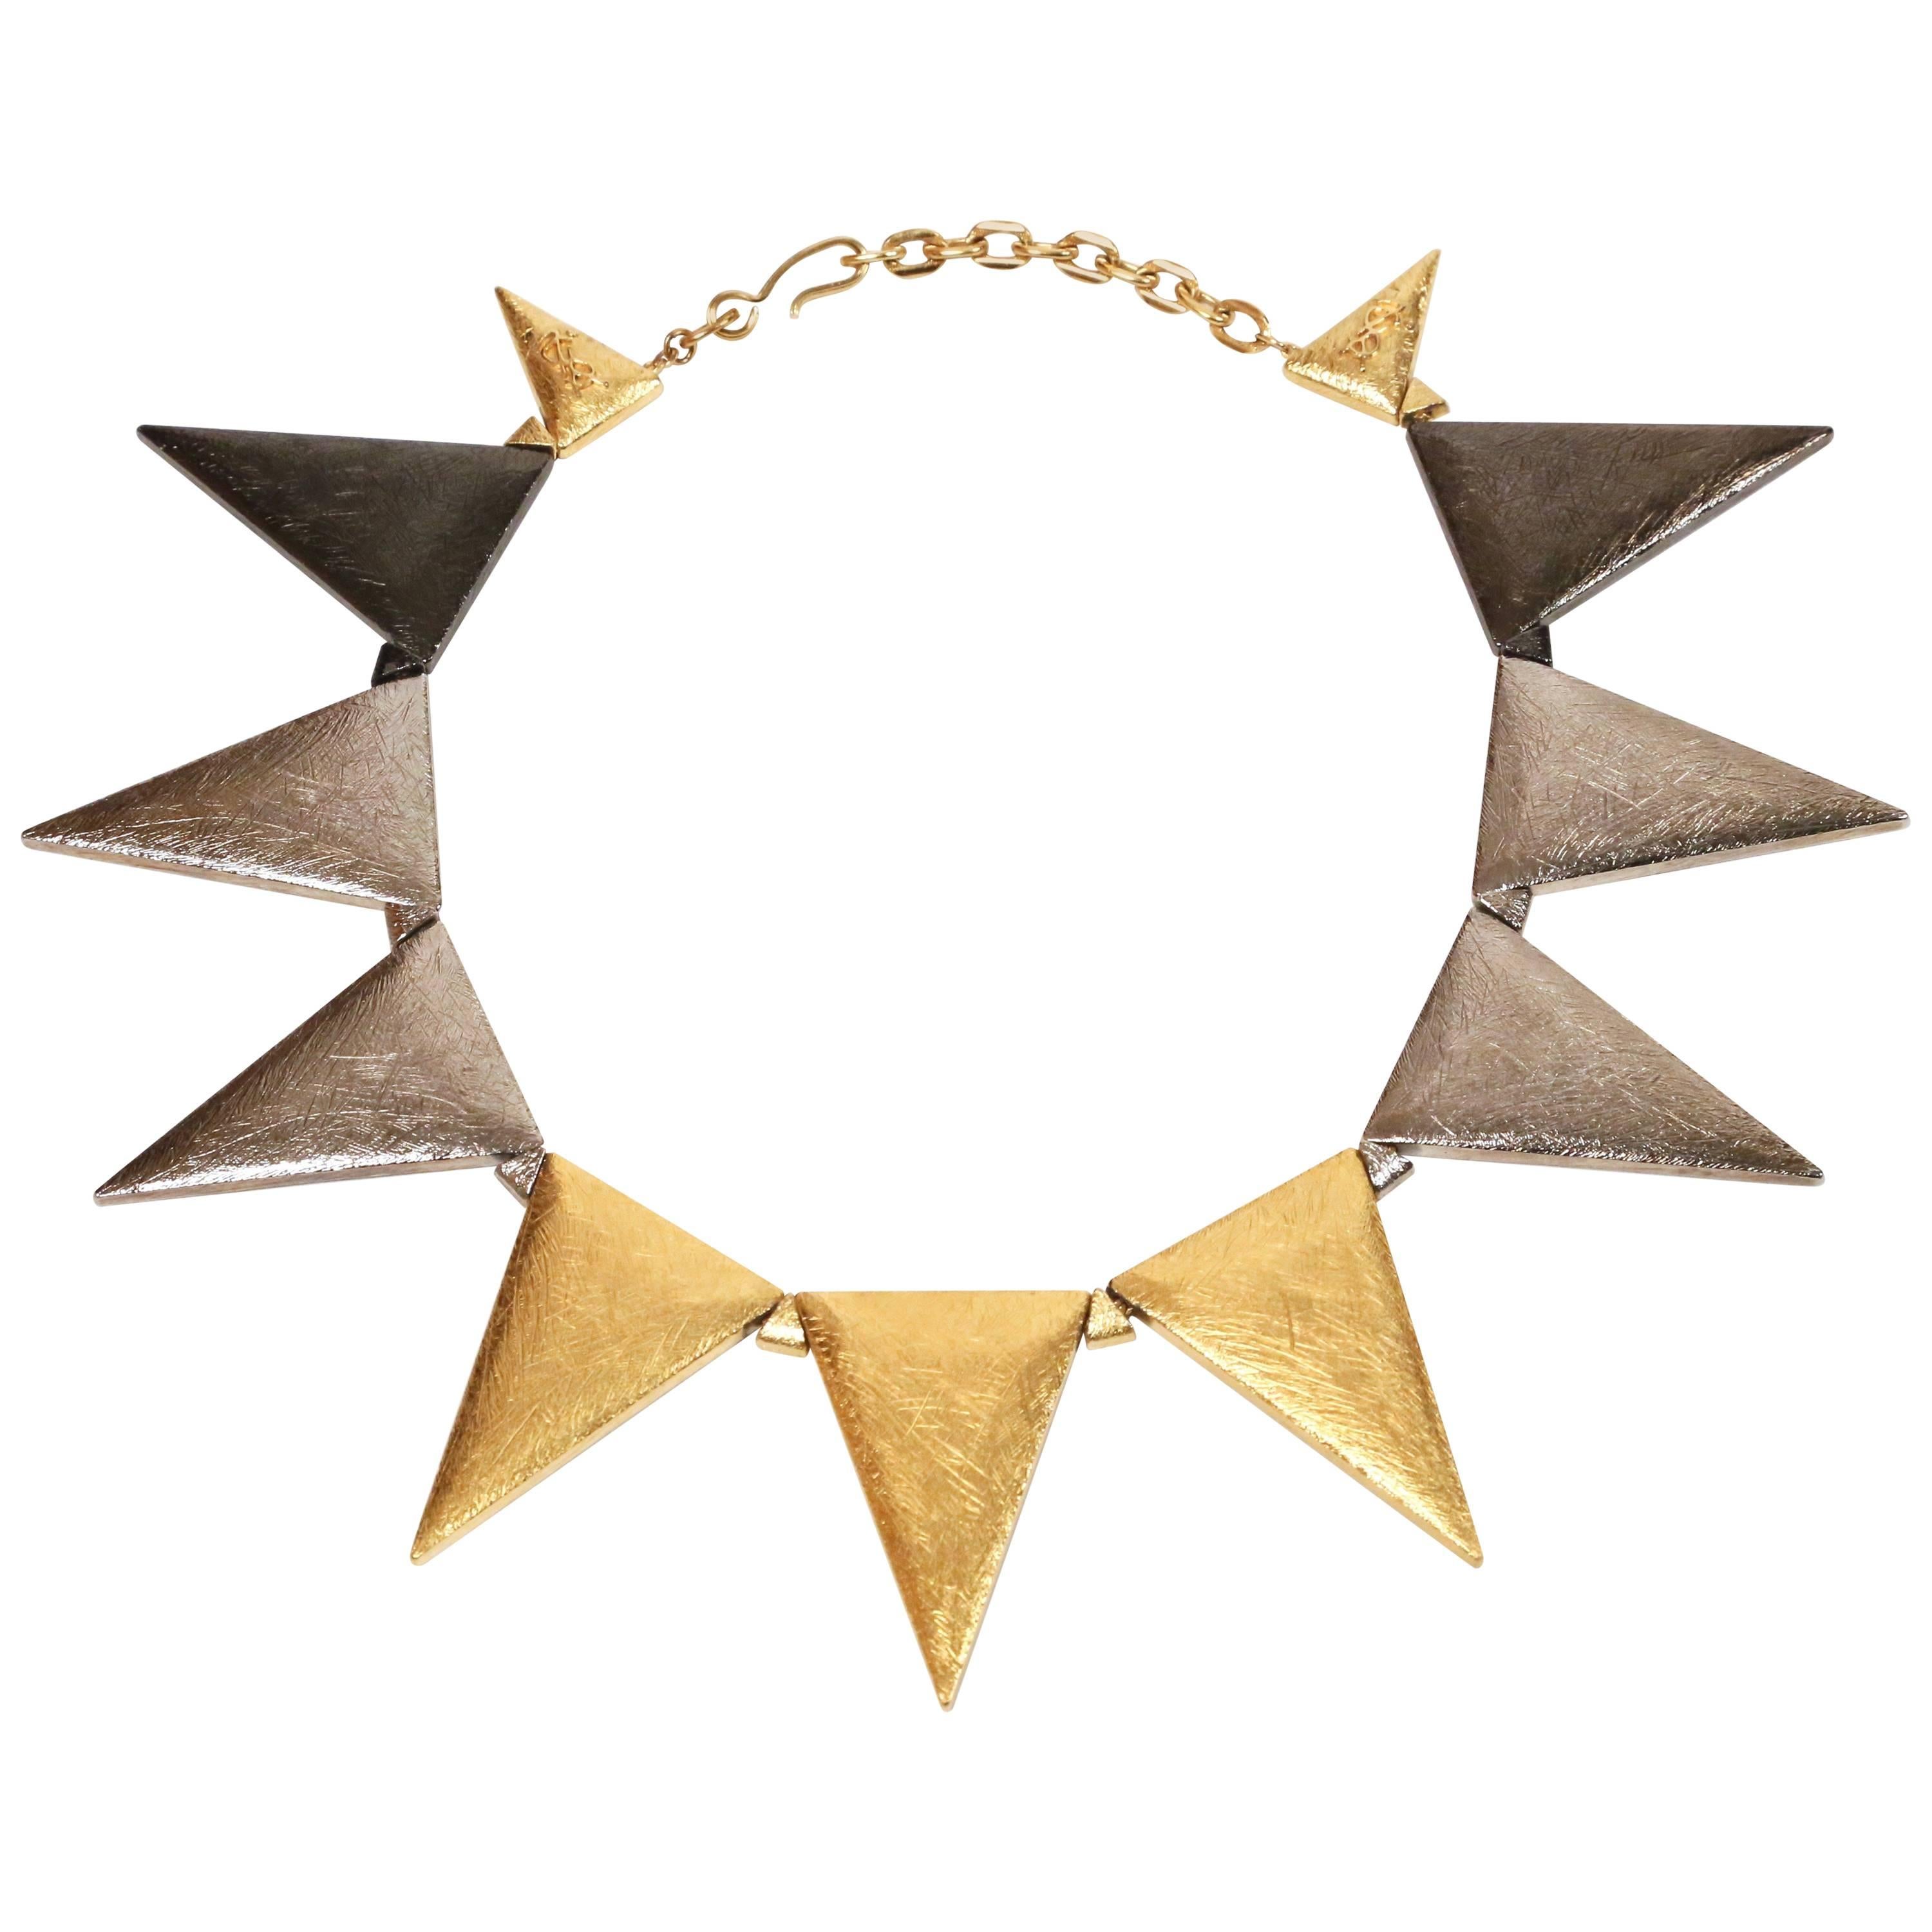 Yves Saint Laurent gold and silver triangular shaped numbered necklace